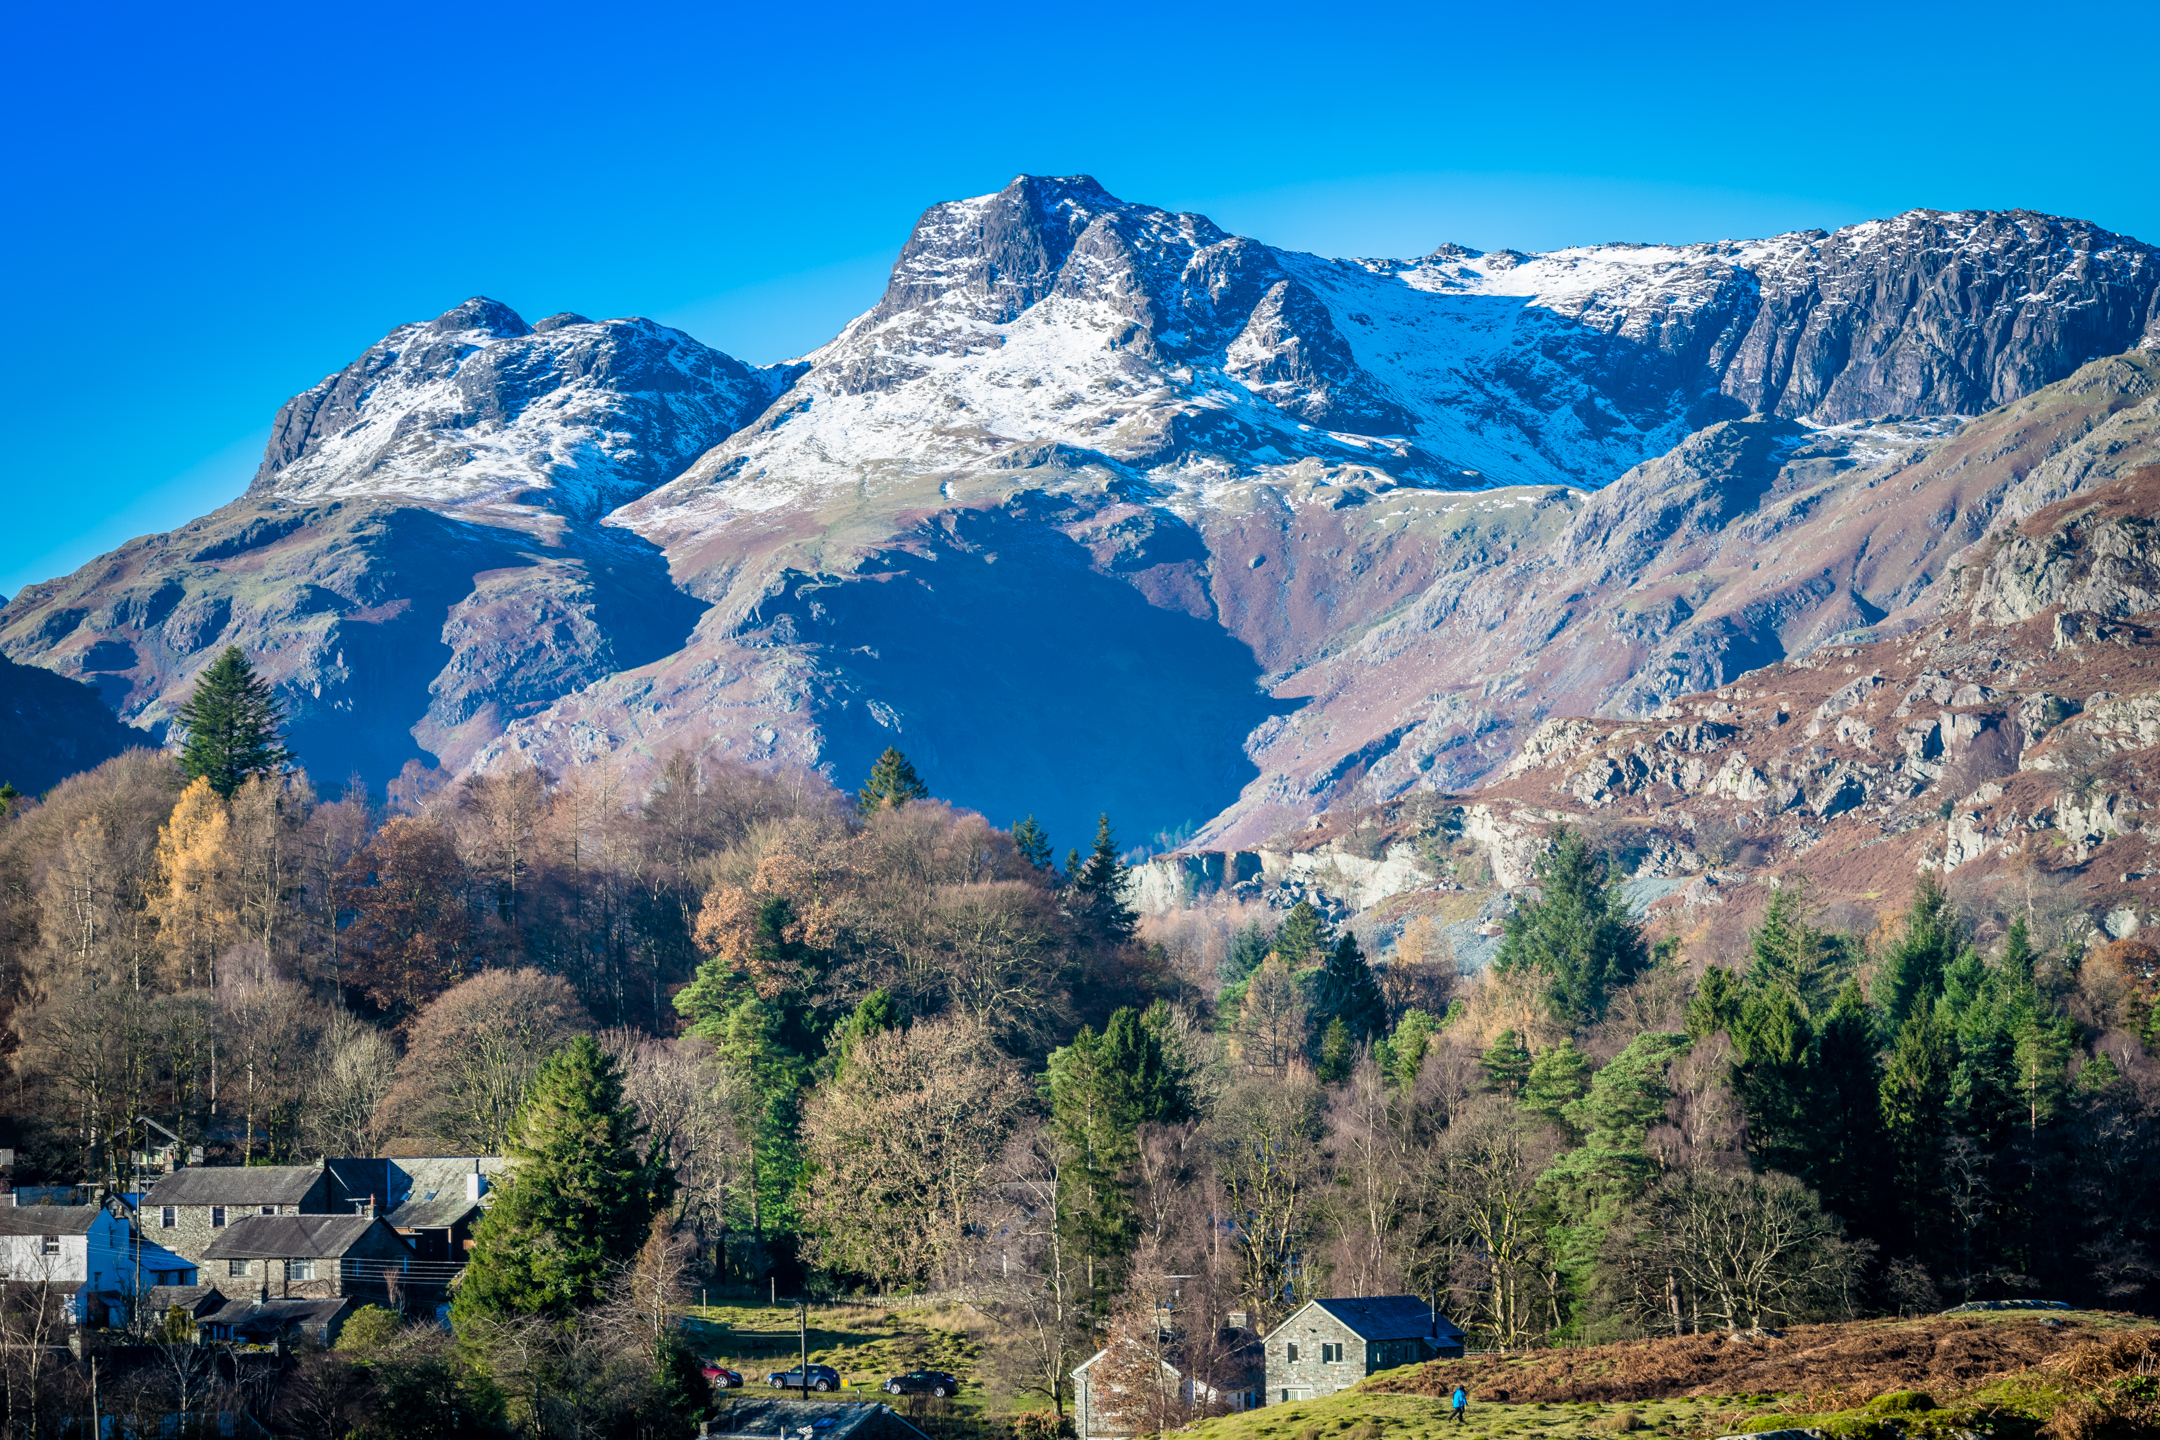 The Langdale Valley in The Lake District National Park.